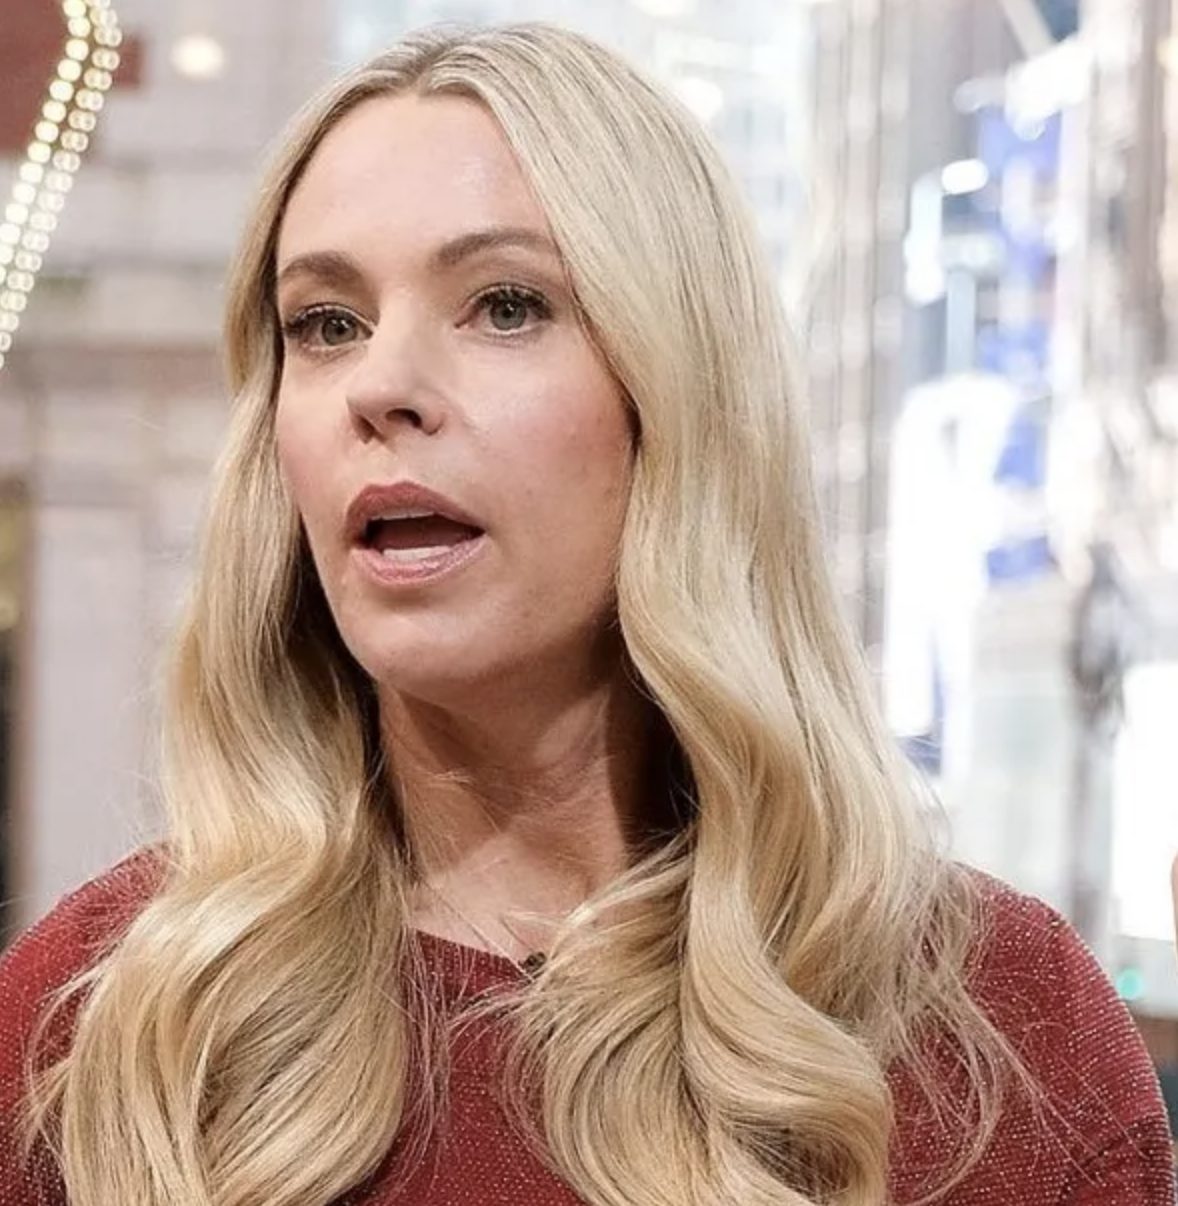 Kate Gosselin Is Just An "Awful Human," Former Publicist Says